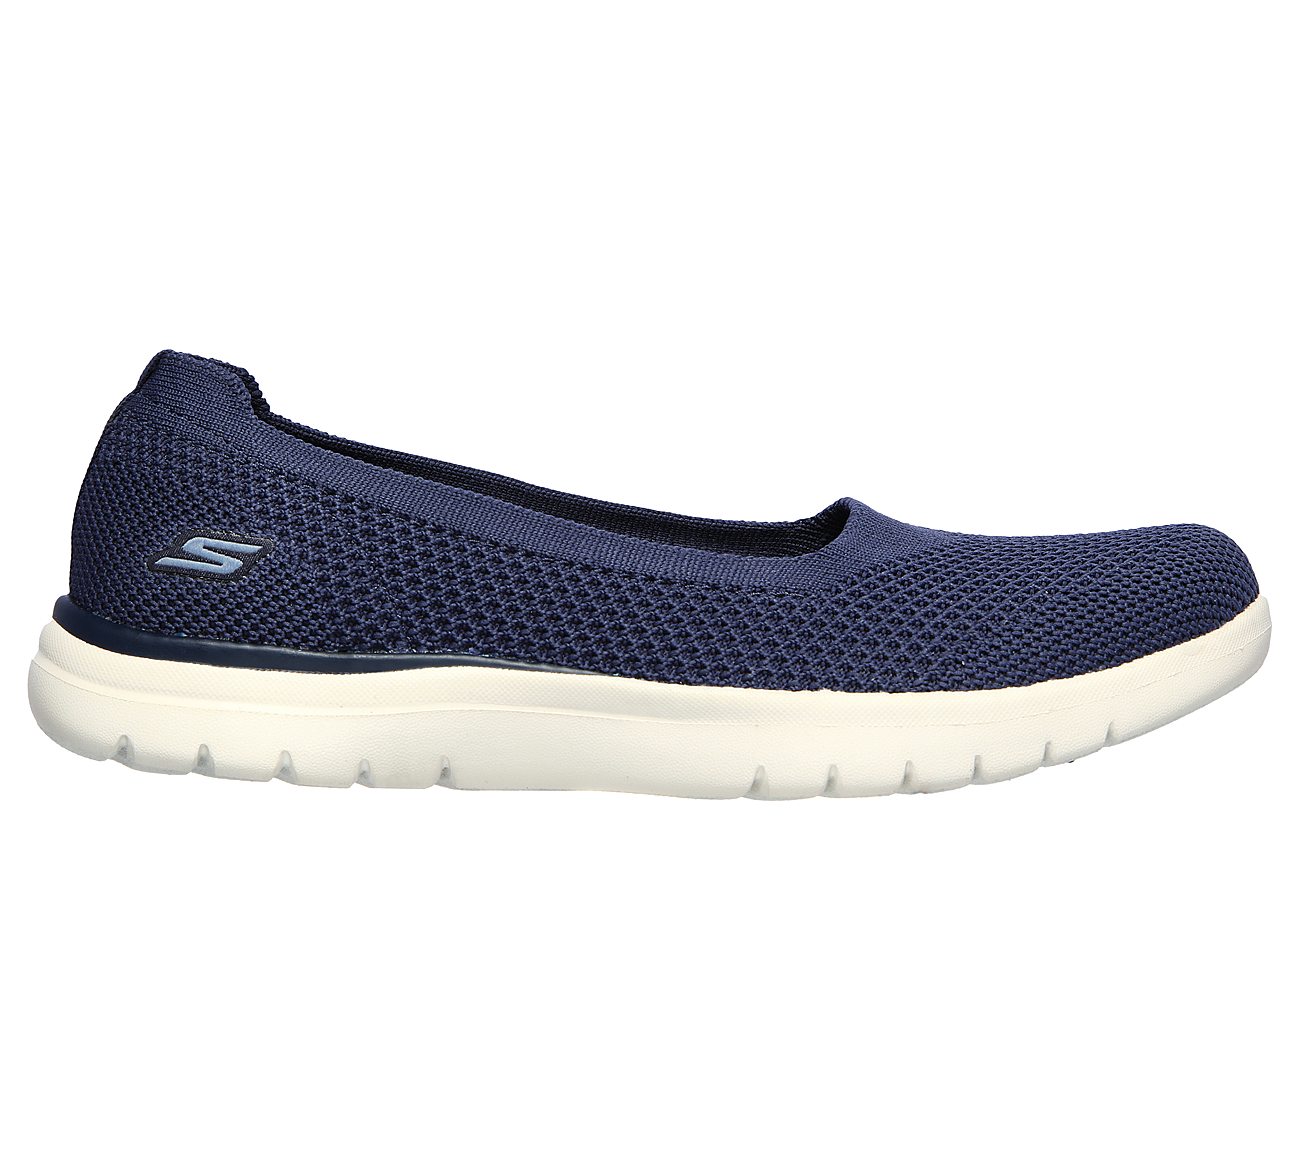 ON-THE-GO FLEX, NNNAVY Footwear Lateral View